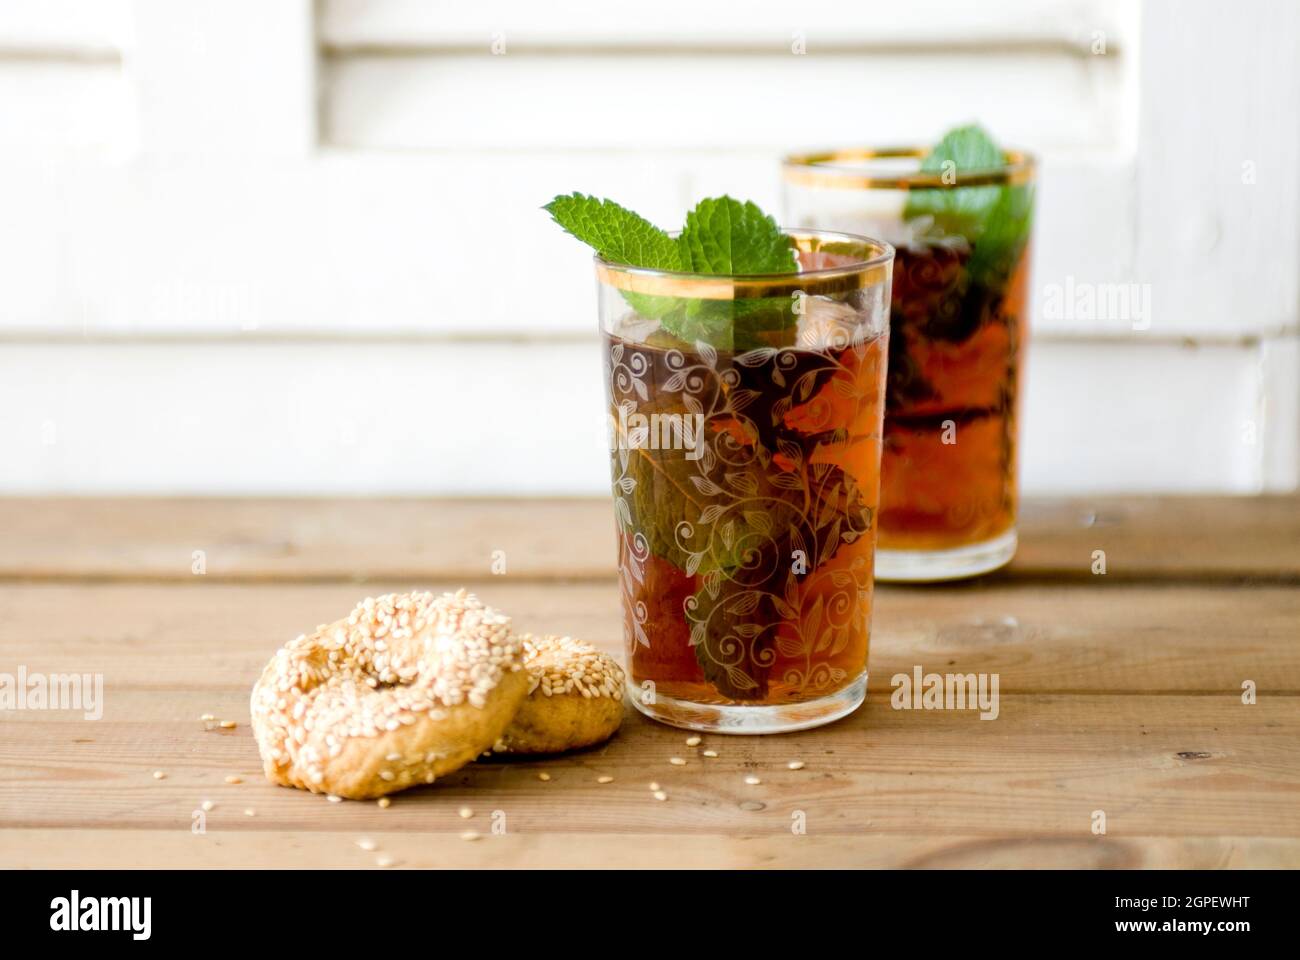 Glass of mint tea, close-up with savoury biscuits Stock Photo